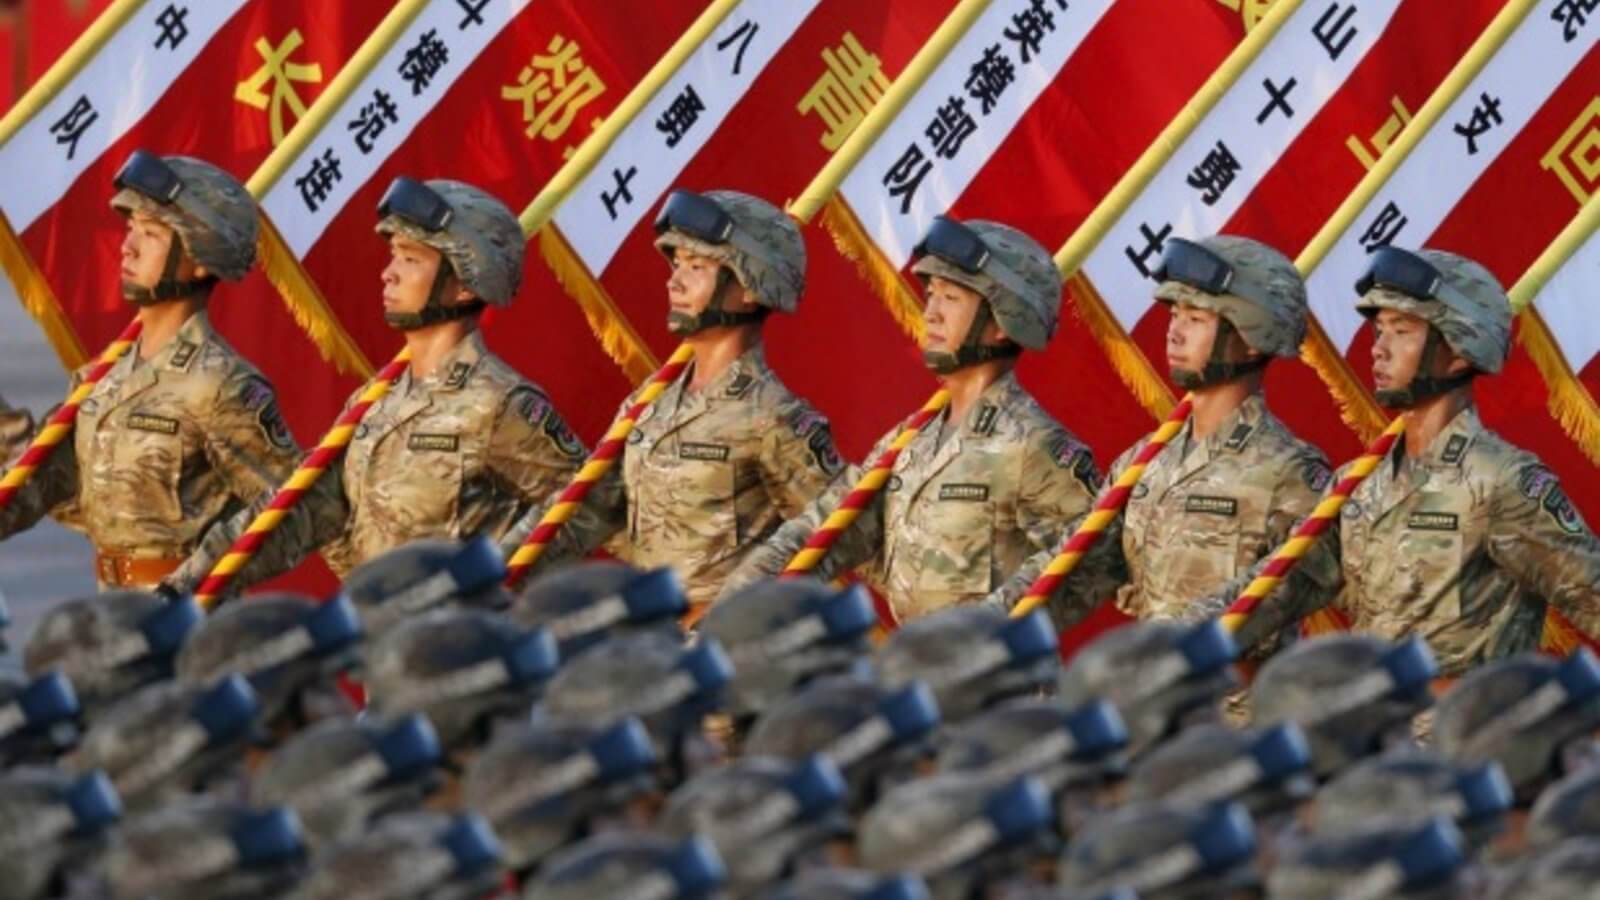 China Hikes Defence Expenditure by 7.2% Amid Growing Regional Security Challenges